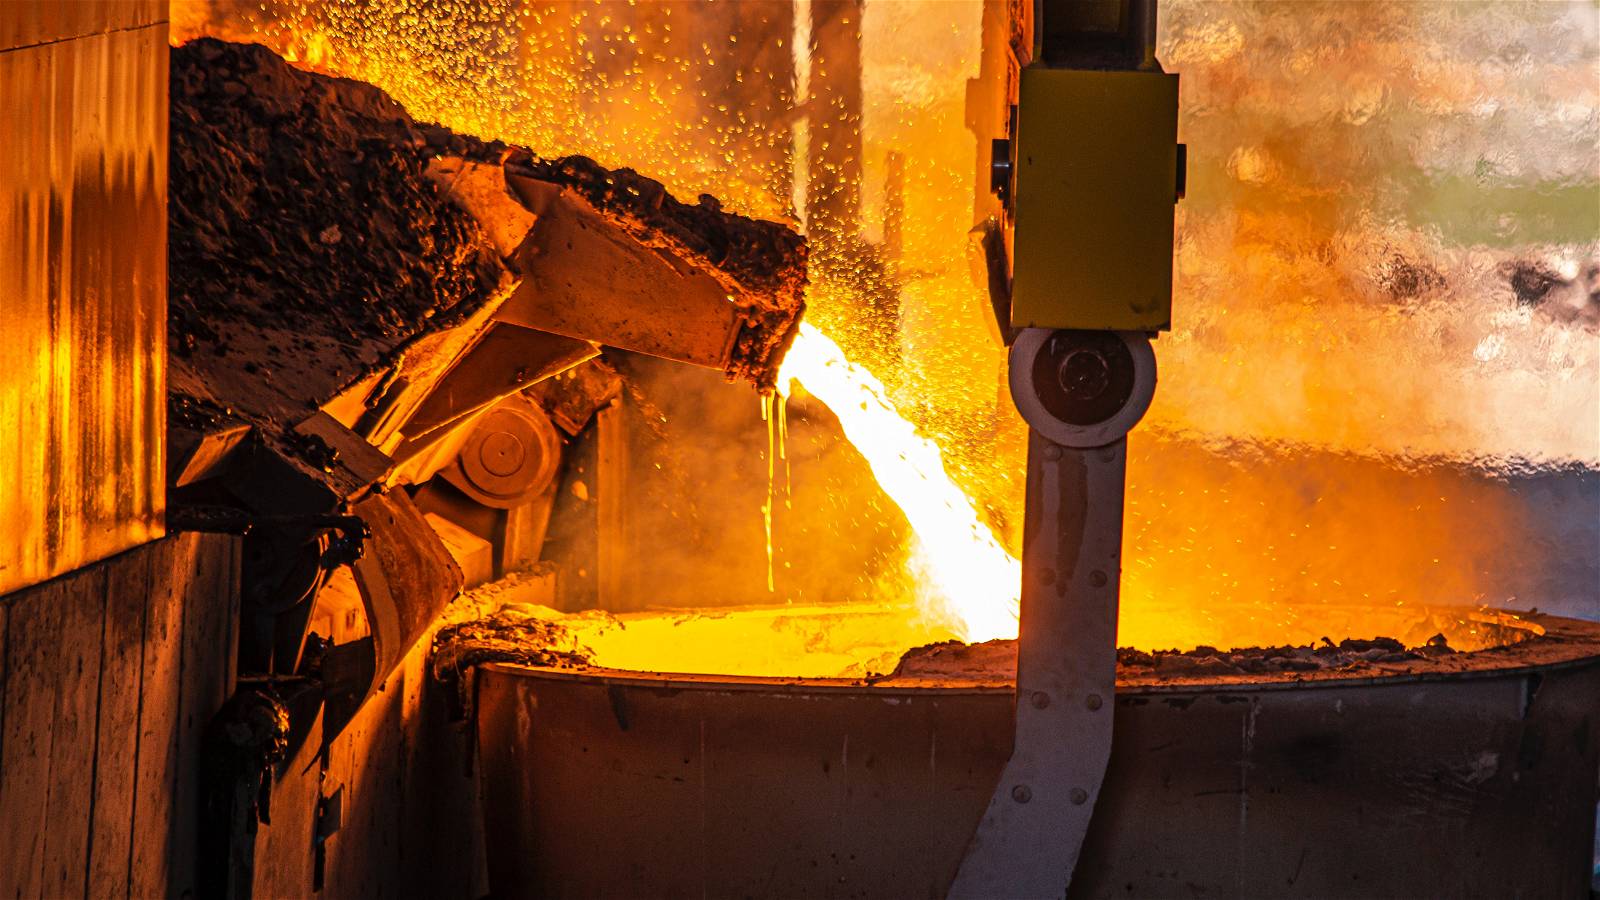 Europe’s decarbonization focus sets region’s steel sector in motion